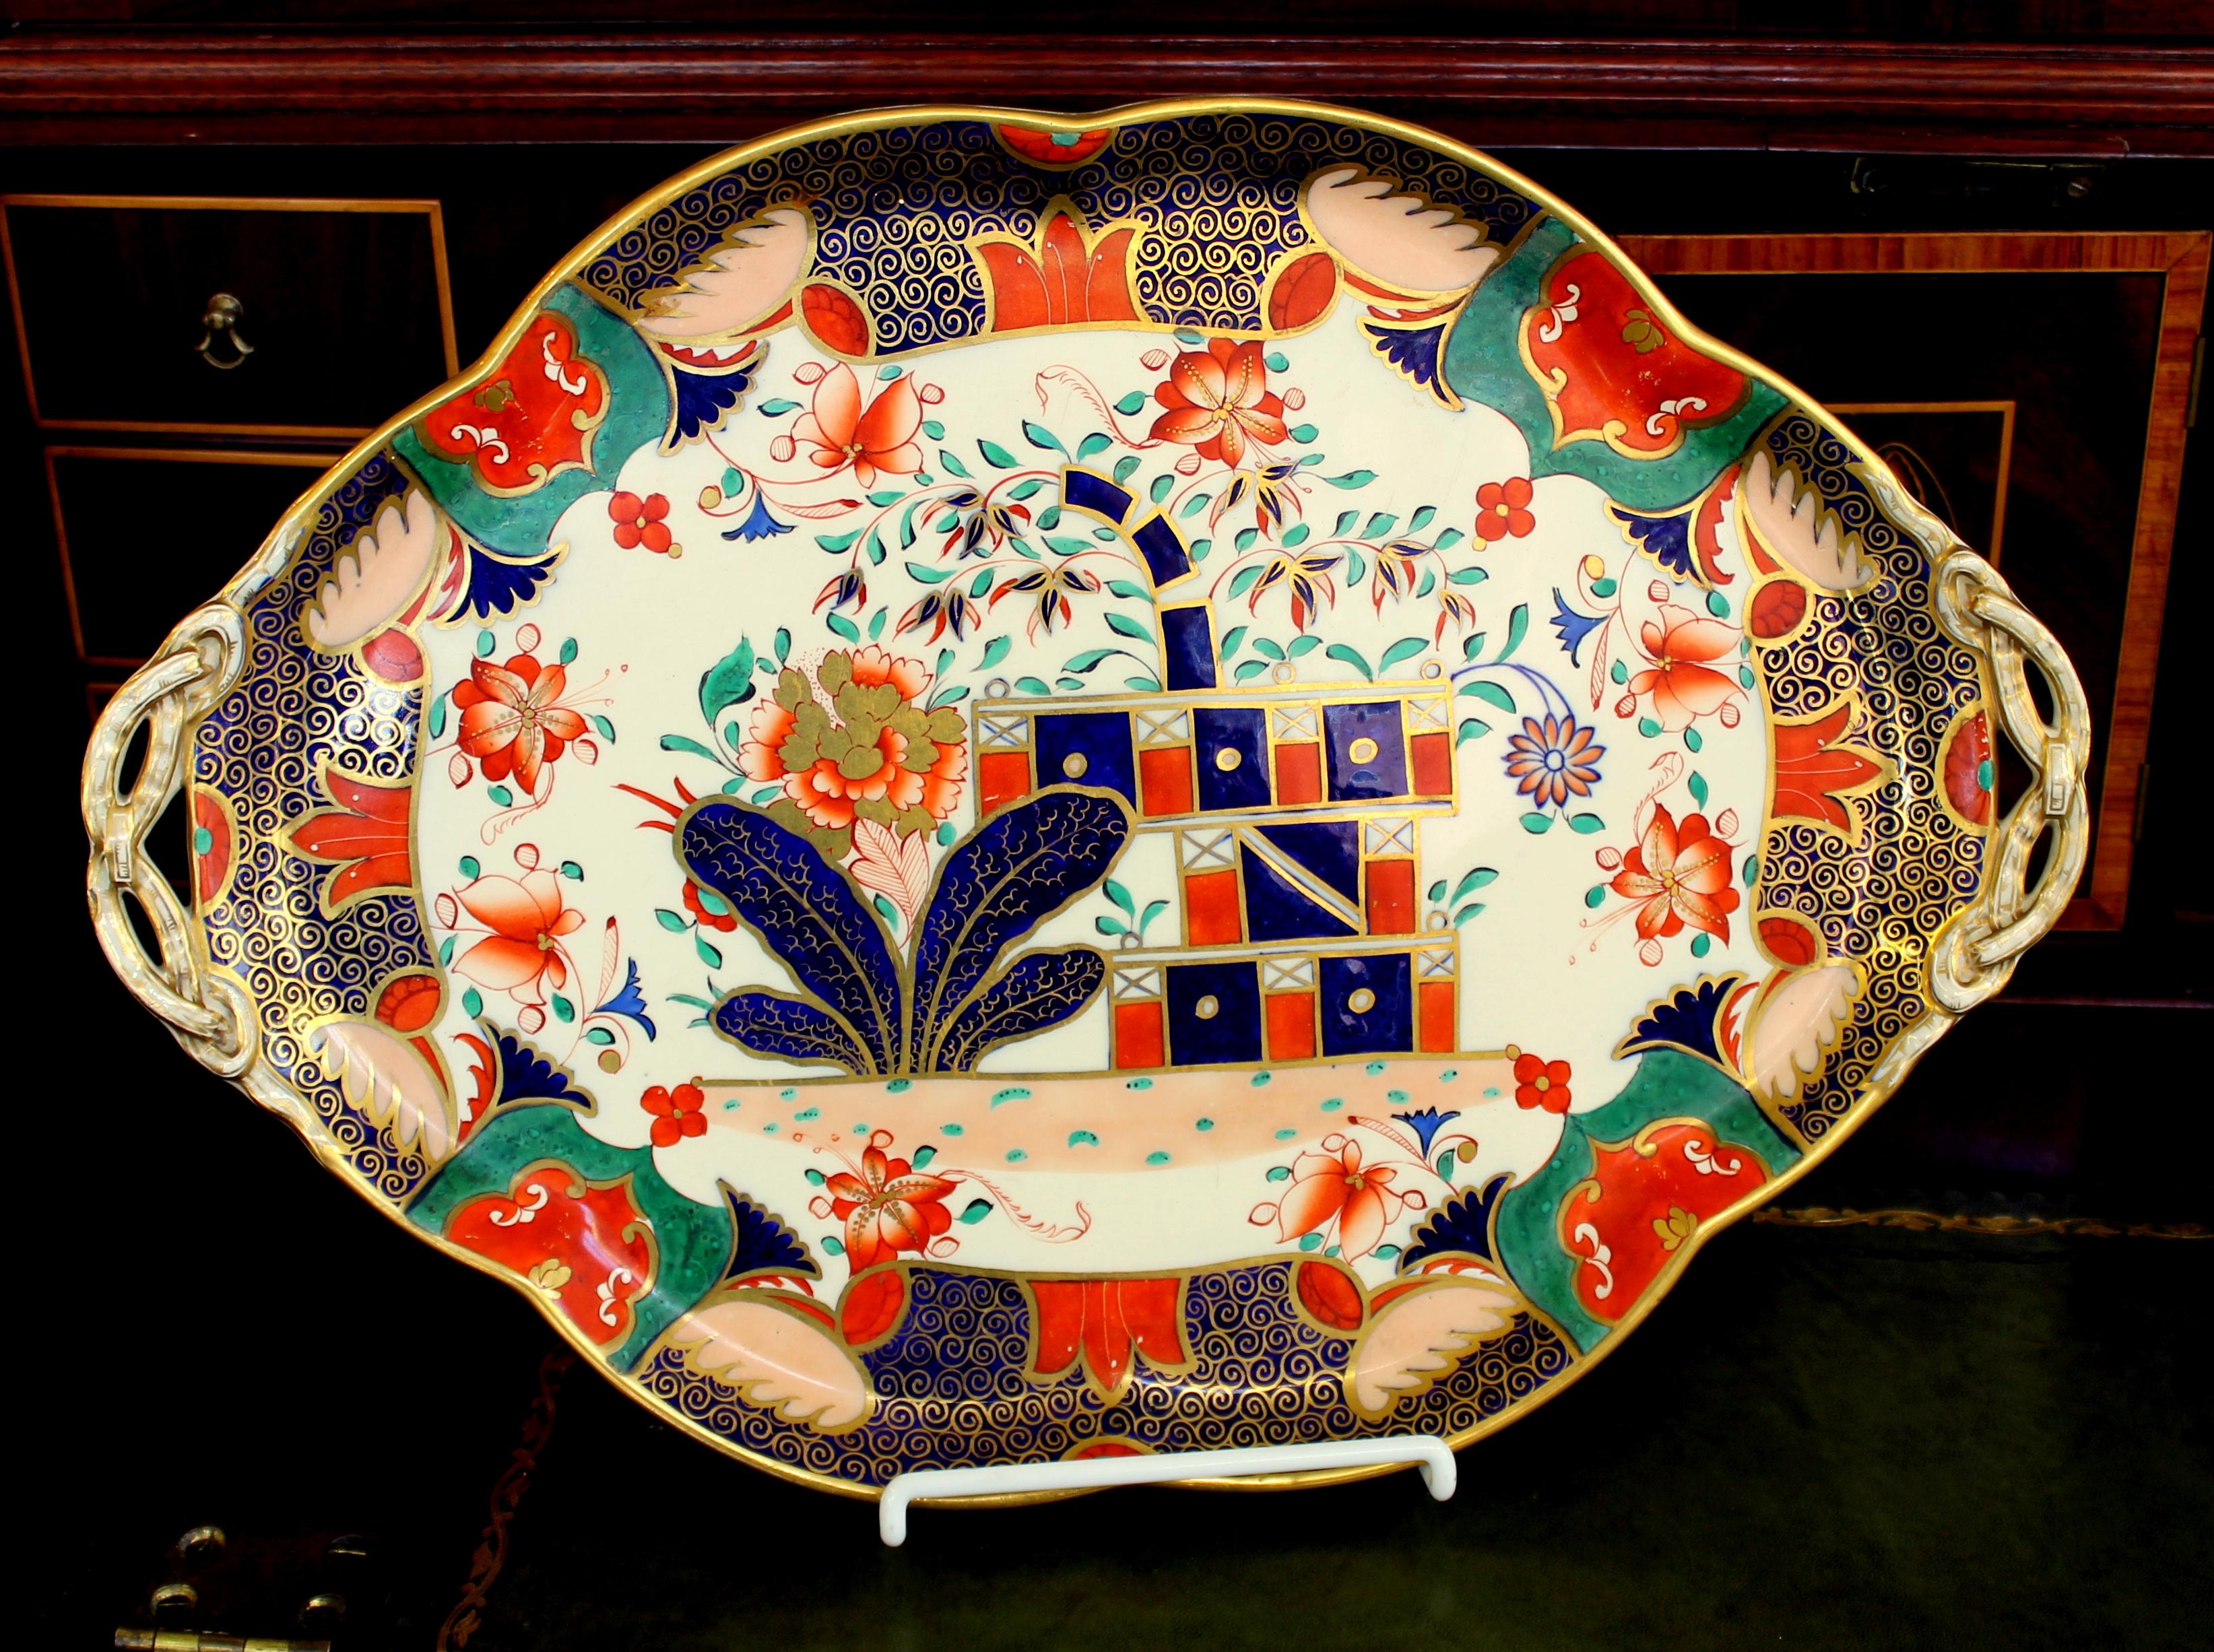 Very rare and fine antique English Copeland (Spode) hand painted Earthenware Imari decor cabaret, dejeuner or vanity tray with impressed 